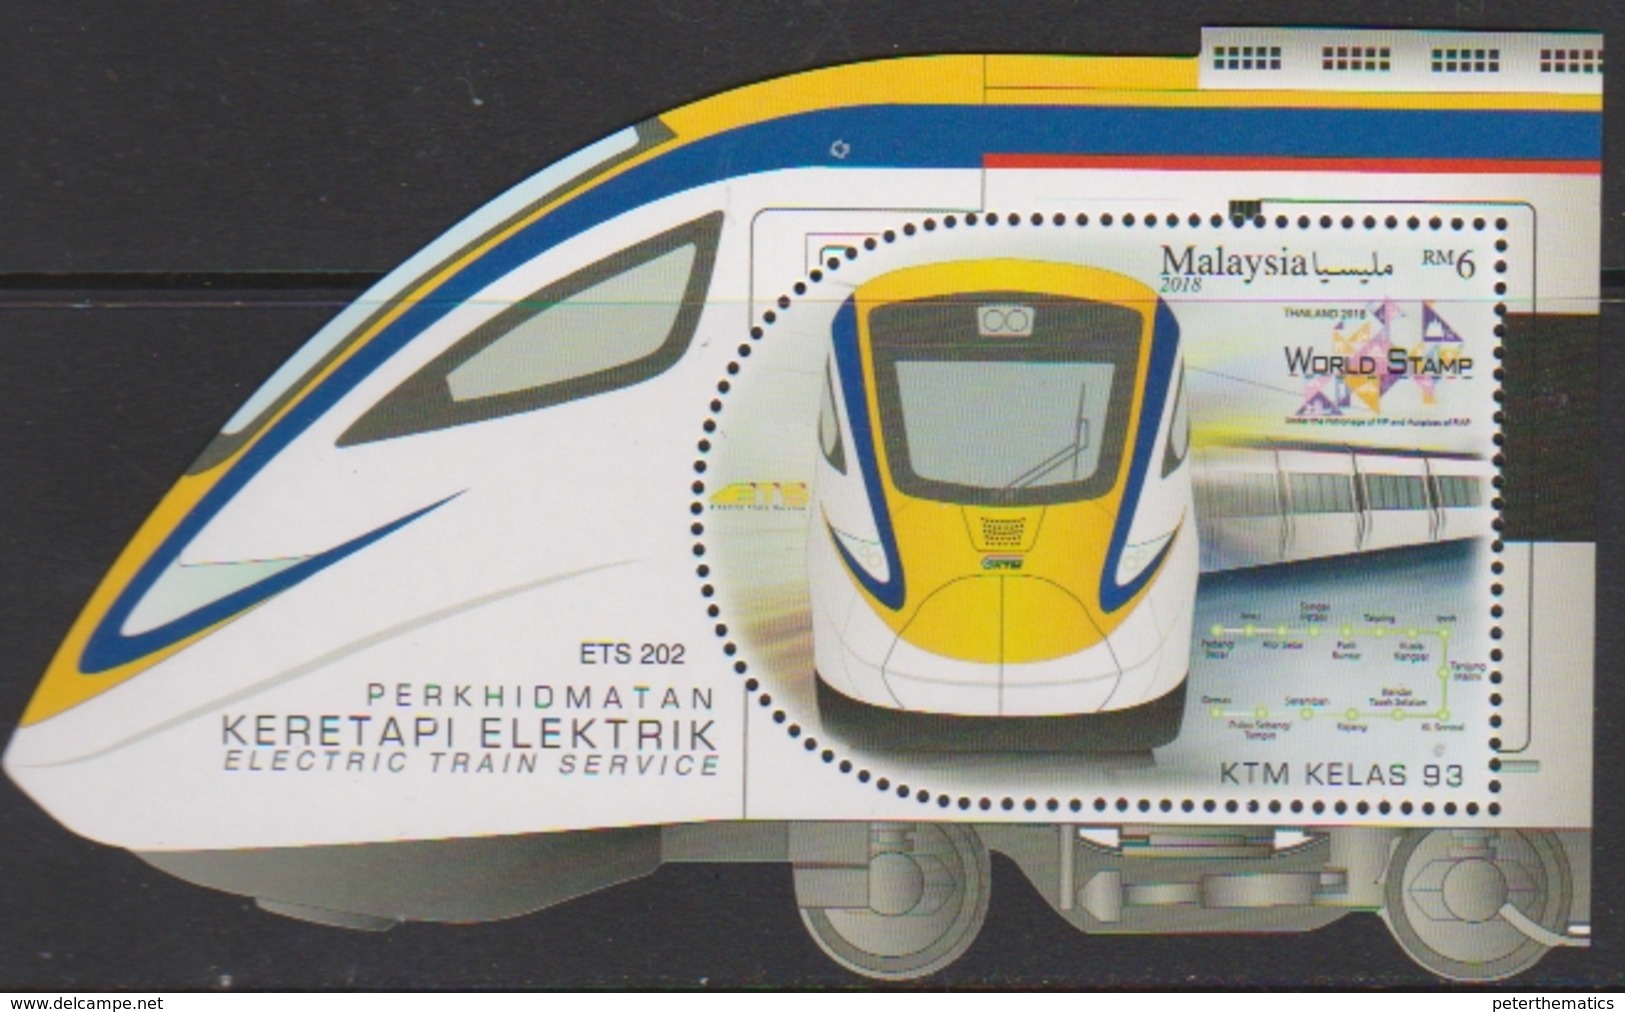 MALAYSIA, 2019, TRAINS, WORLD STAMP EXHIBITION OVERPRINT, TRAINED-SHAPED S/SHEET - Trenes